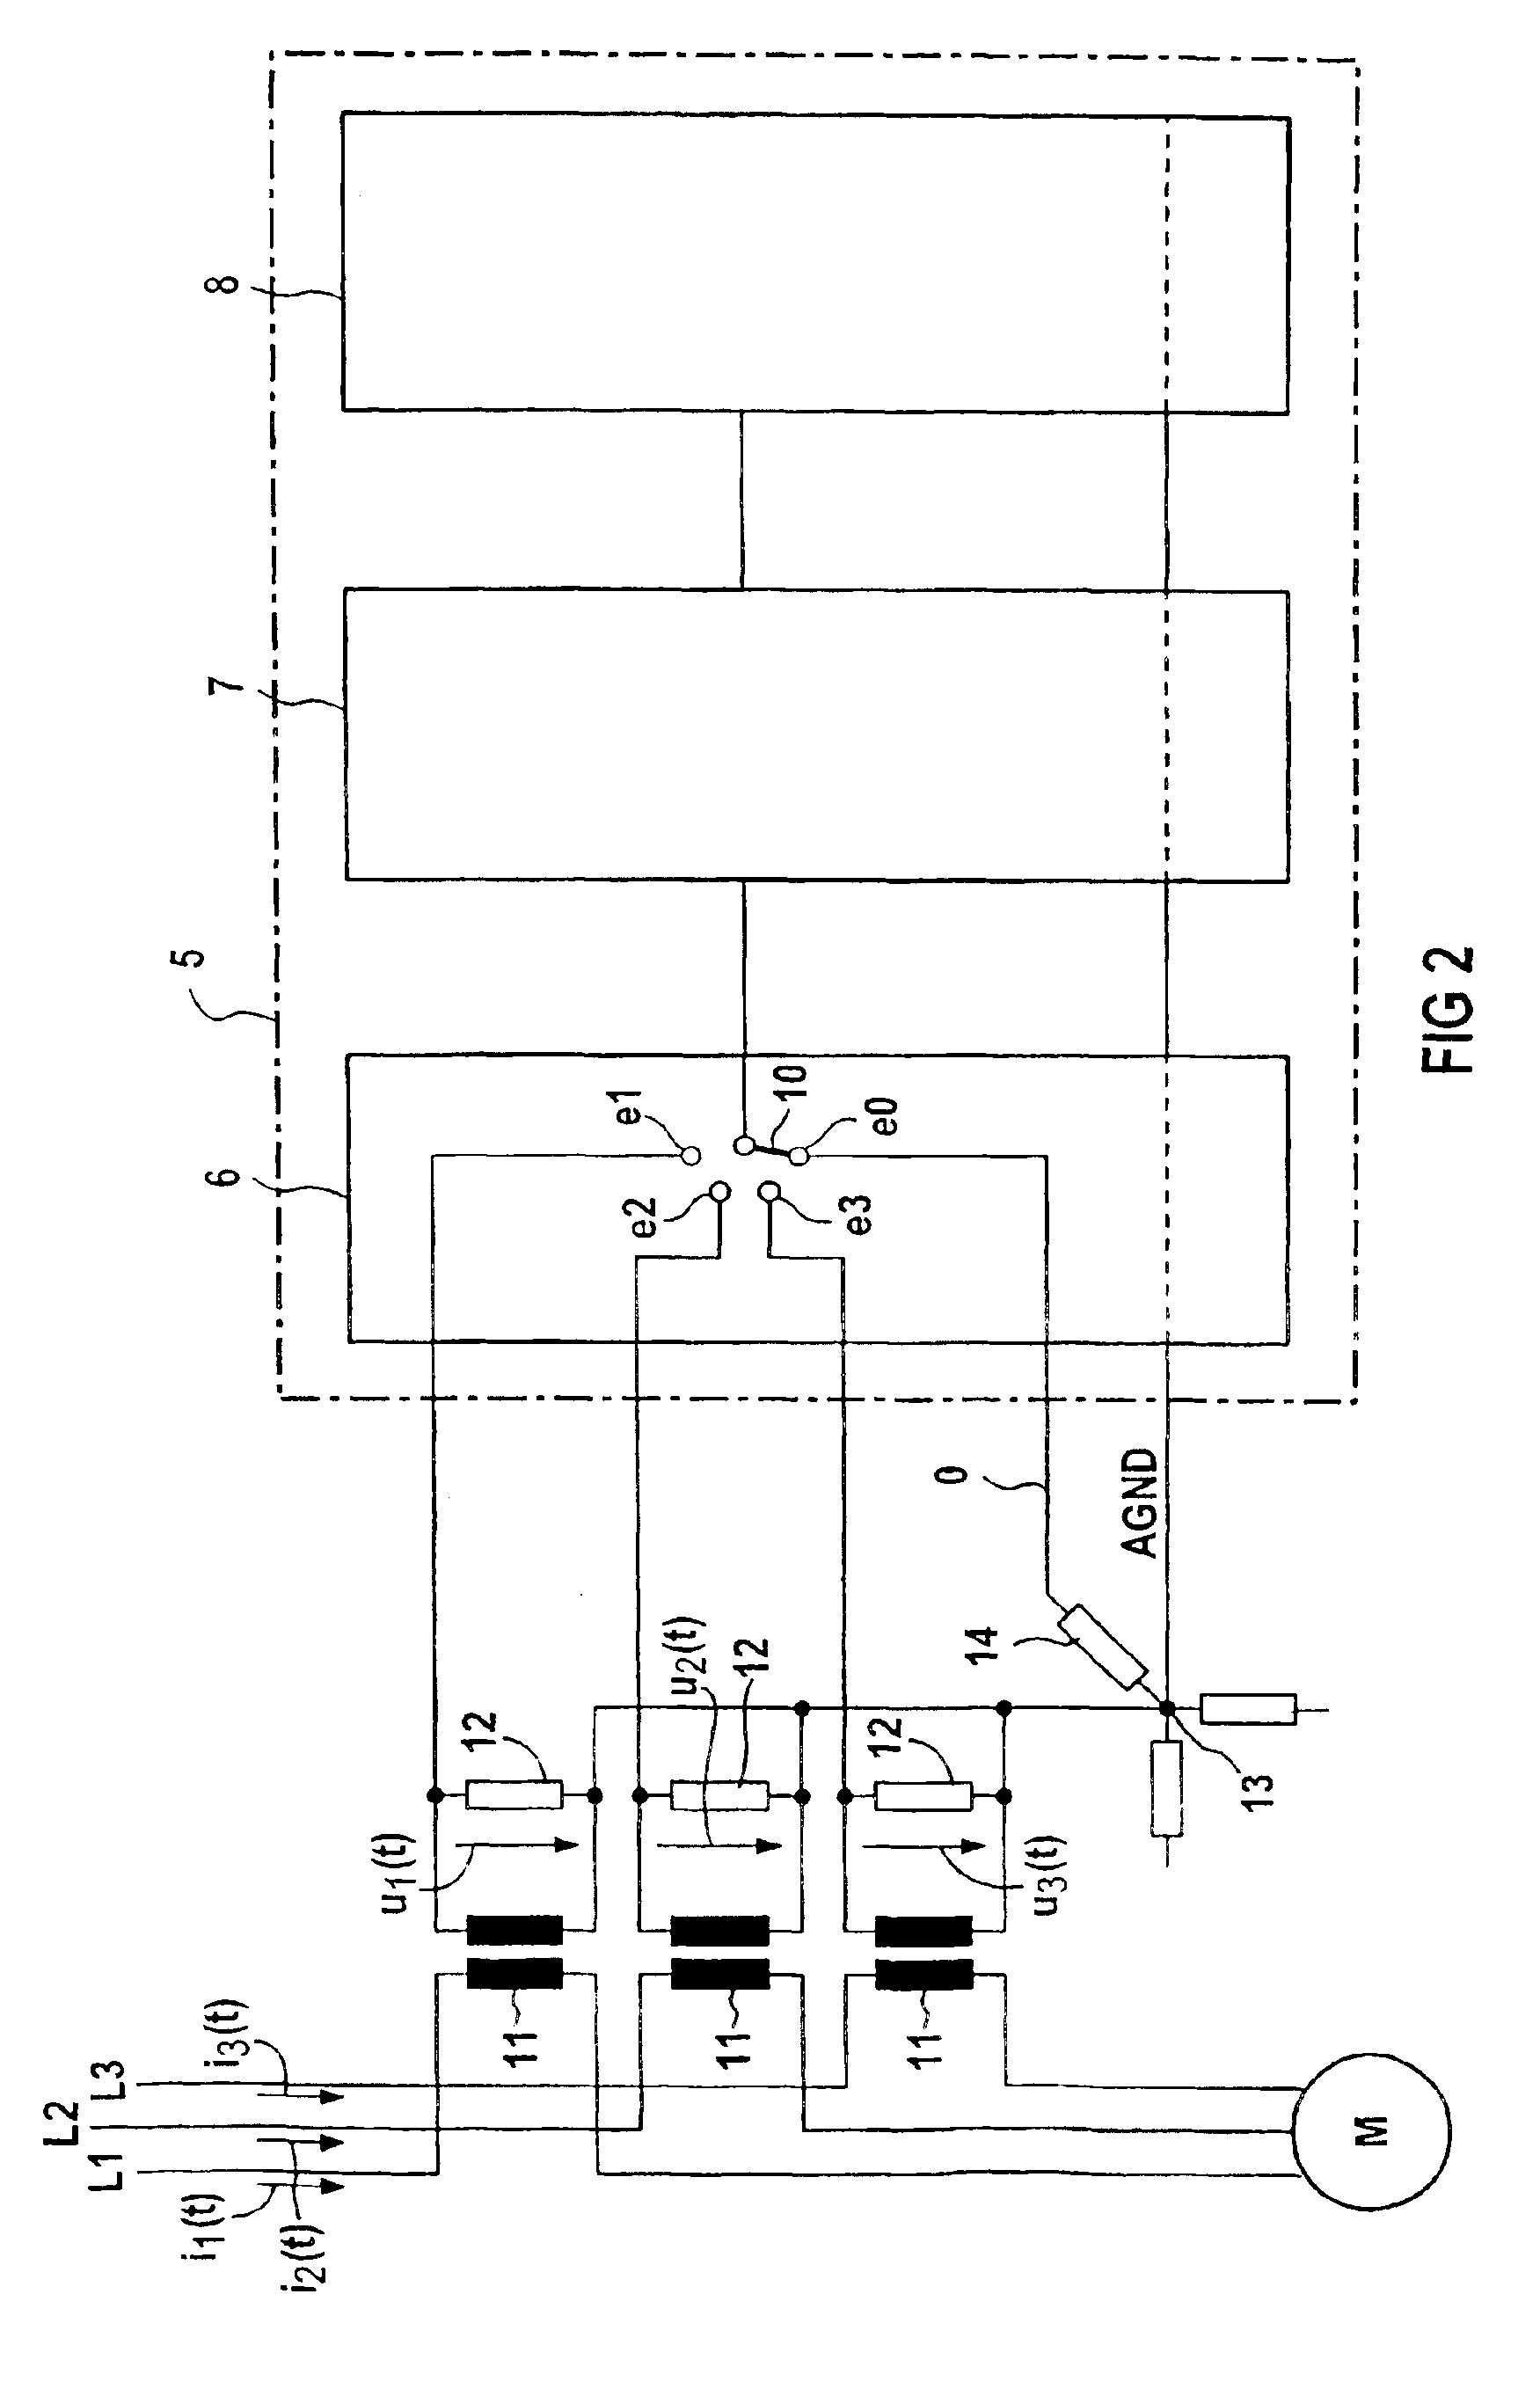 Measured value acquisition and processing unit for small measuring signals